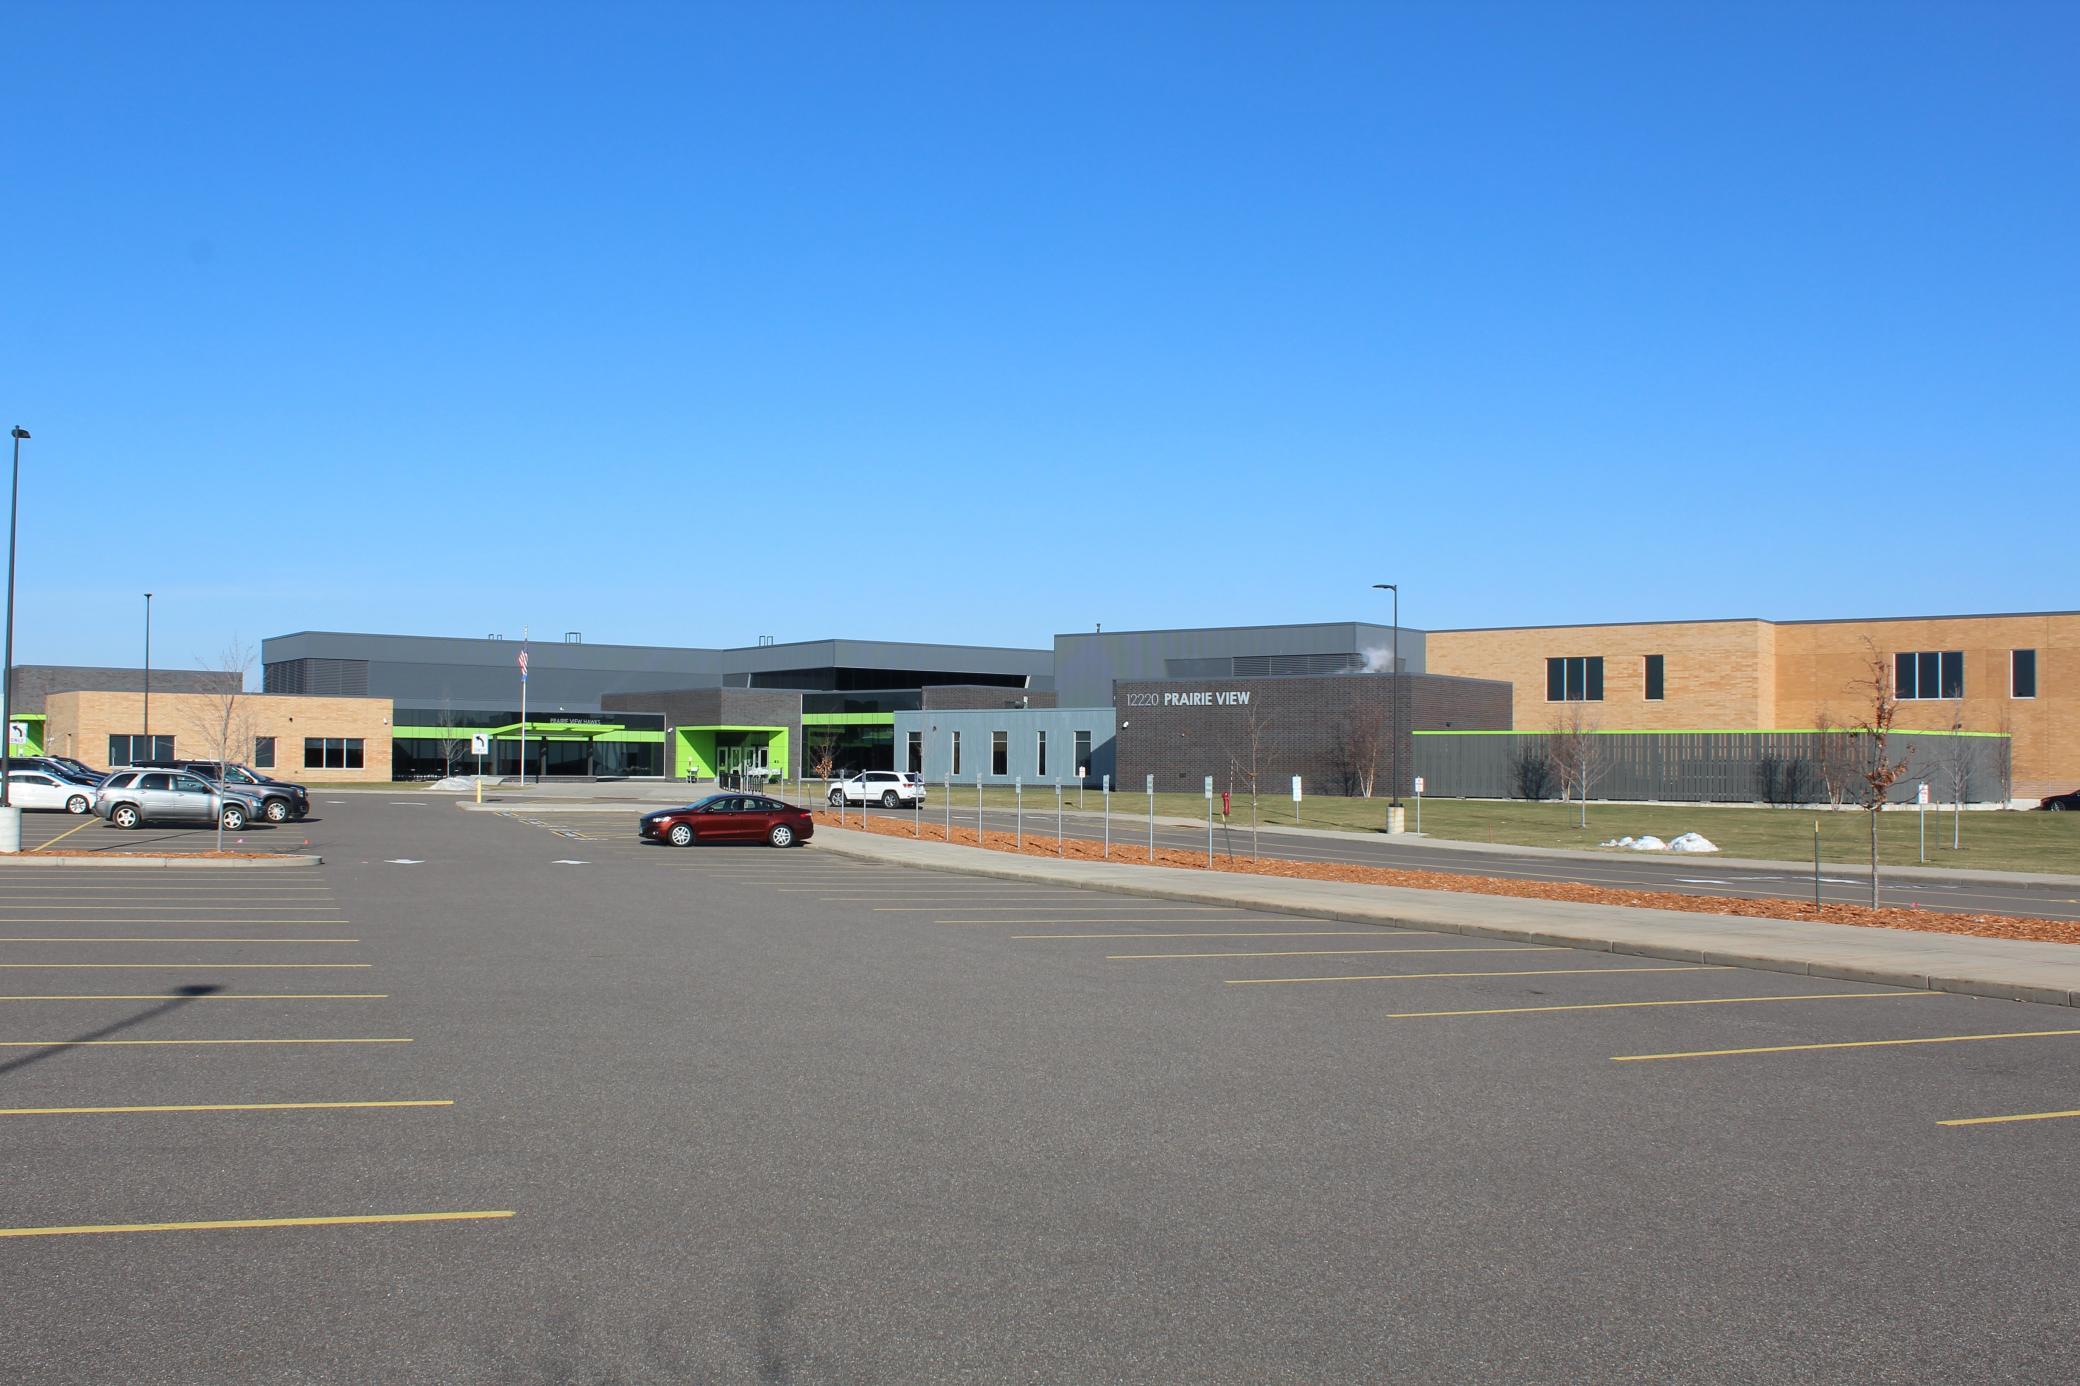 Prairie View Elementary, establish in 2017, provides a state-of-the-art learning facility for the residents of Northwater.